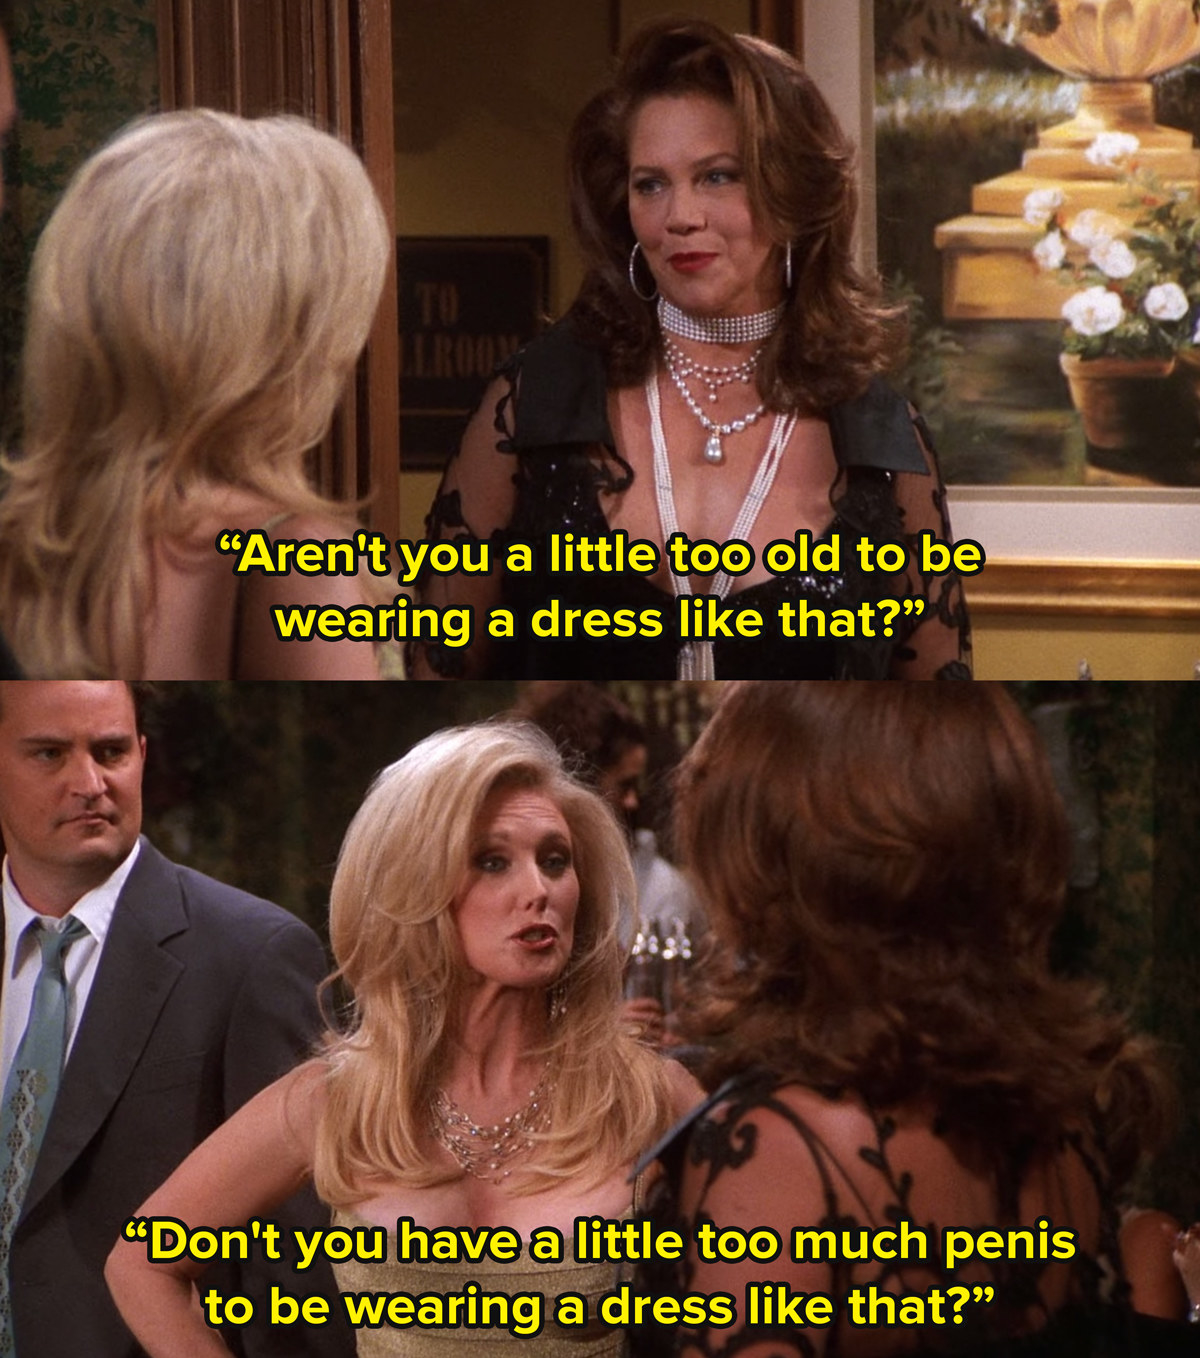 Chandler from Friends&#x27;s dad, who presents as female, sees Chandler&#x27;s mum and says aren&#x27;t you a little old to be wearing a dress like that? She replies don&#x27;t you have a little too much penis to be wearing a dress like that